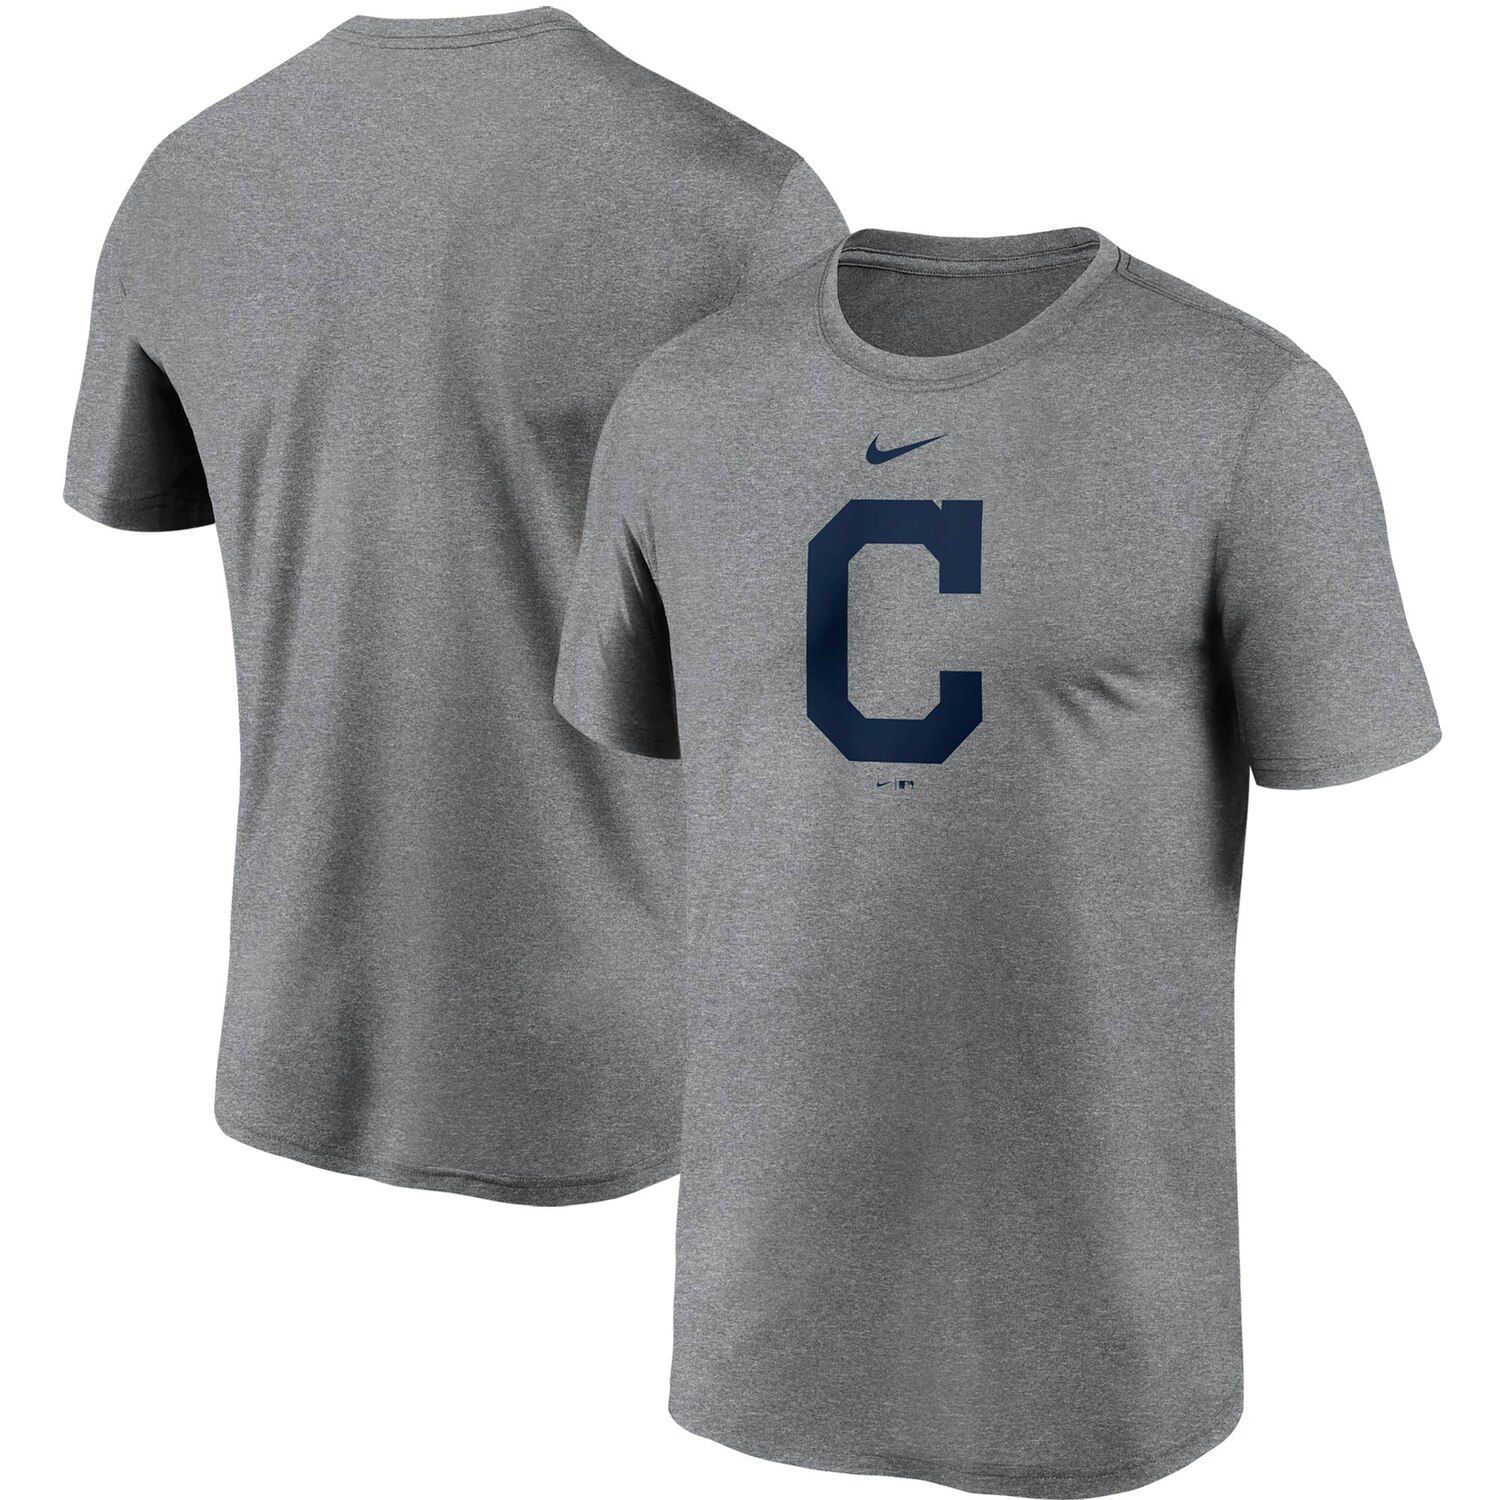 cleveland indians gray jersey